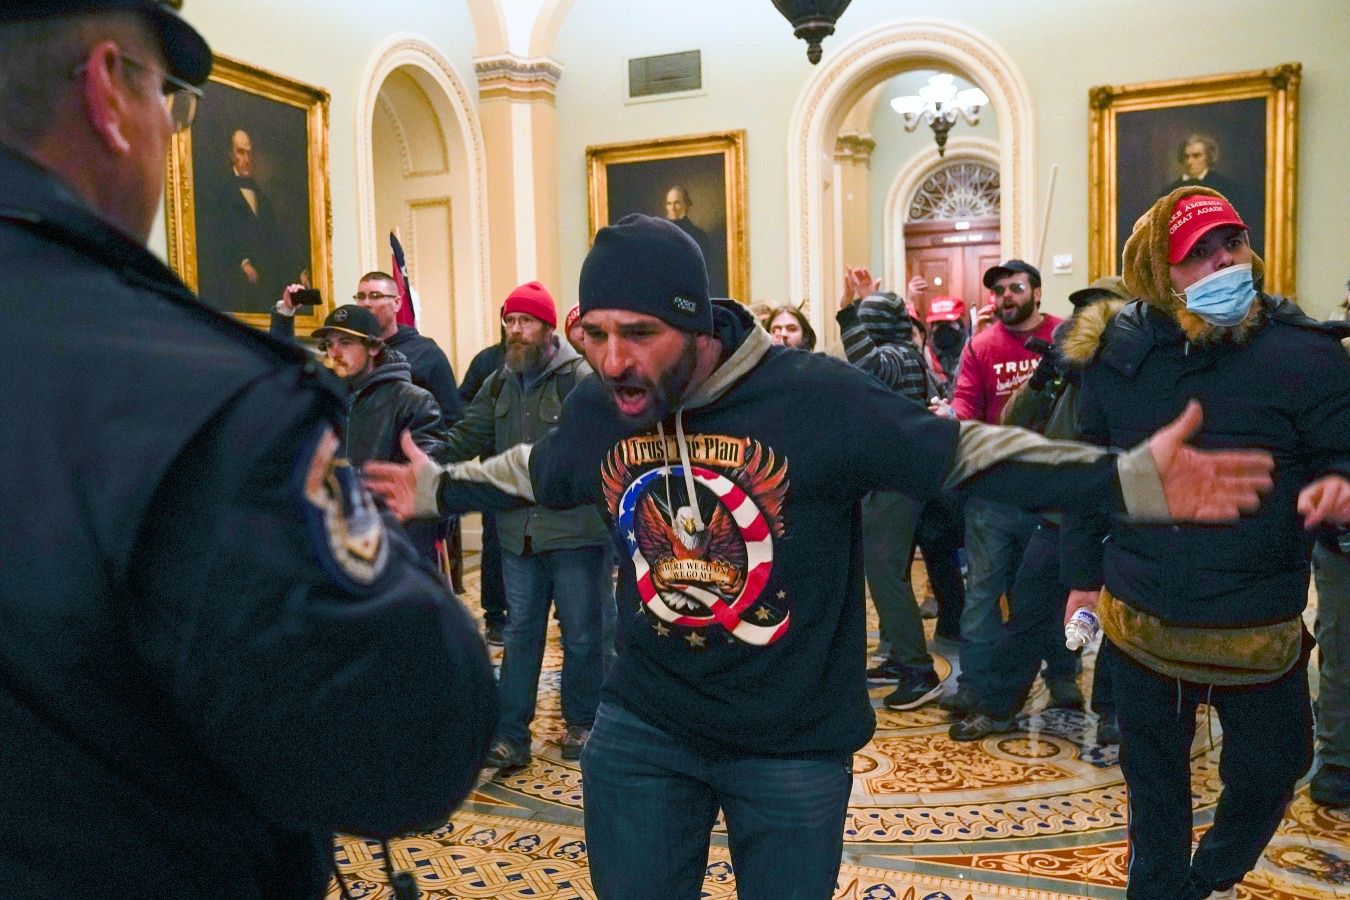 Trump supporters in front of U.S. Capitol Police in the hallway outside of the Senate chamber at the Capitol in Washington, USA. January 6, 2021